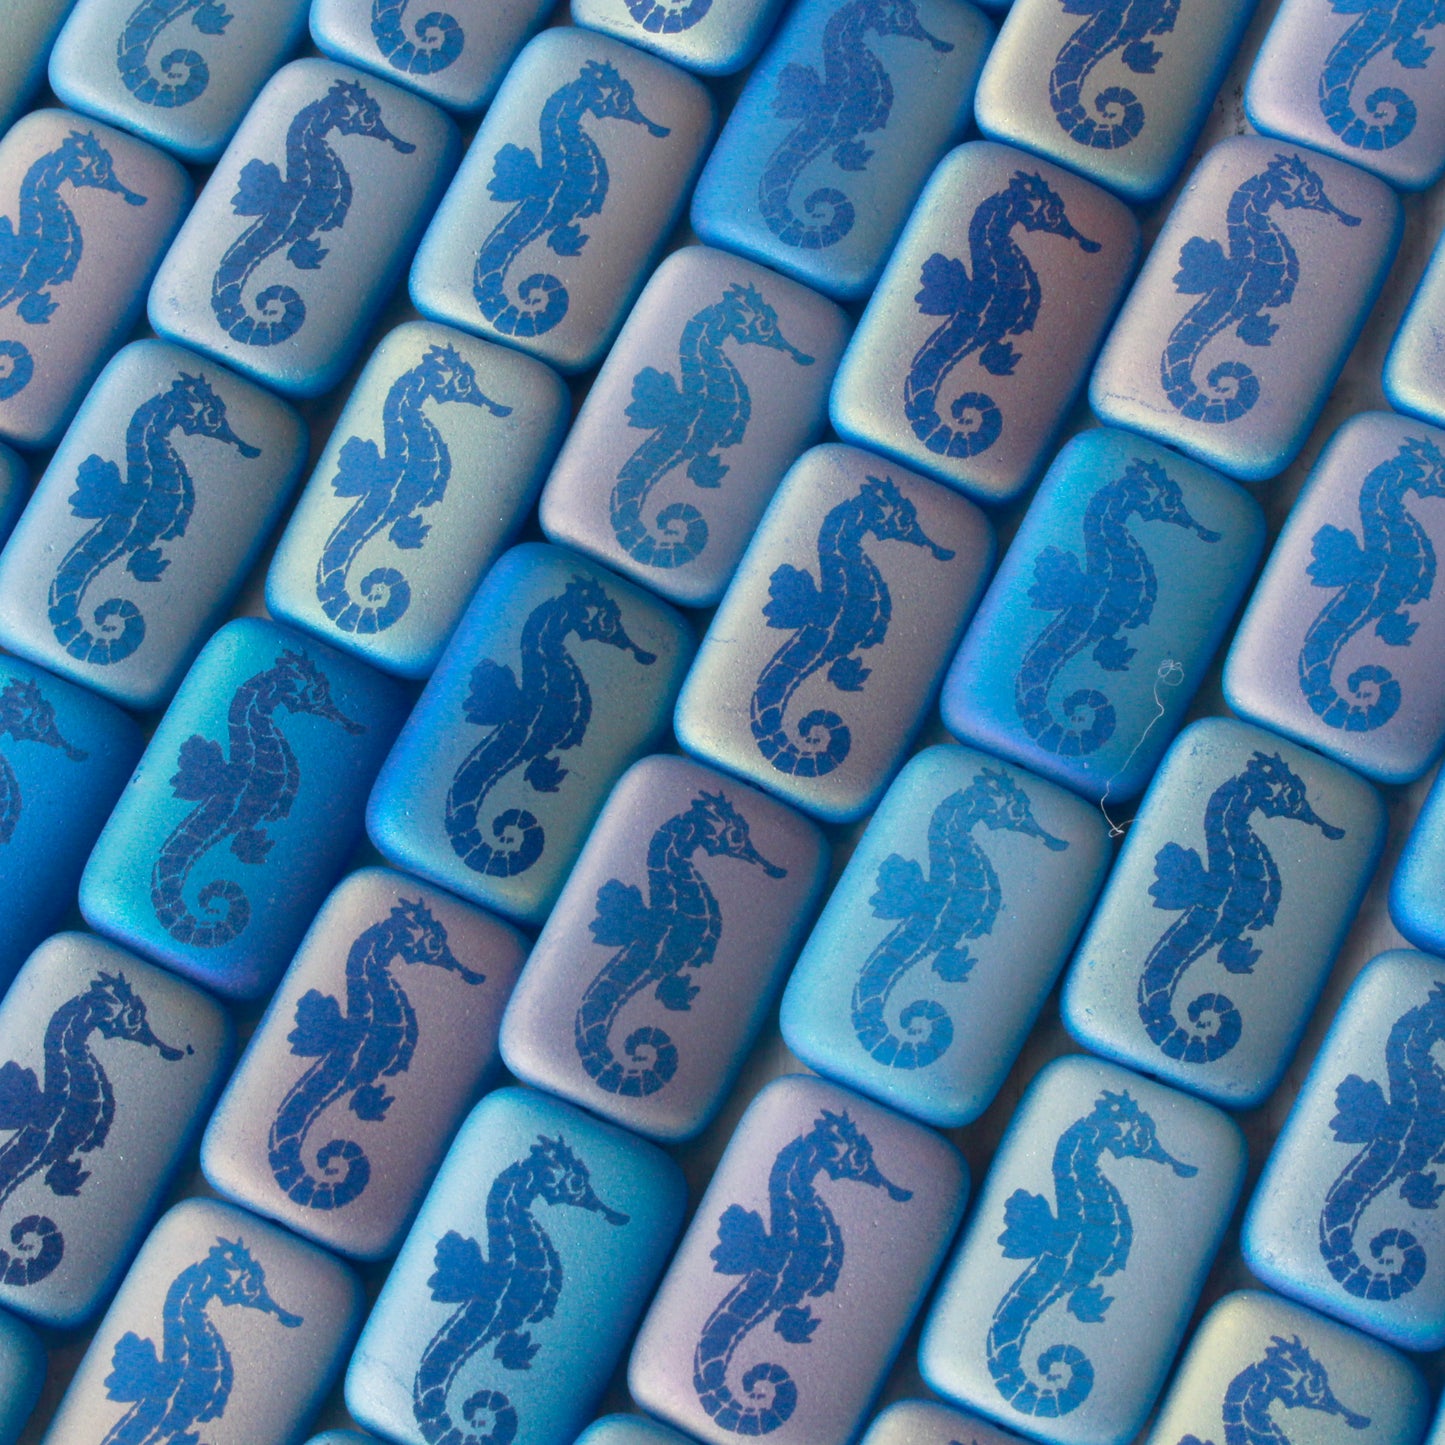 Seahorse Beads - 19mm Rectangle Beads - 6 Beads